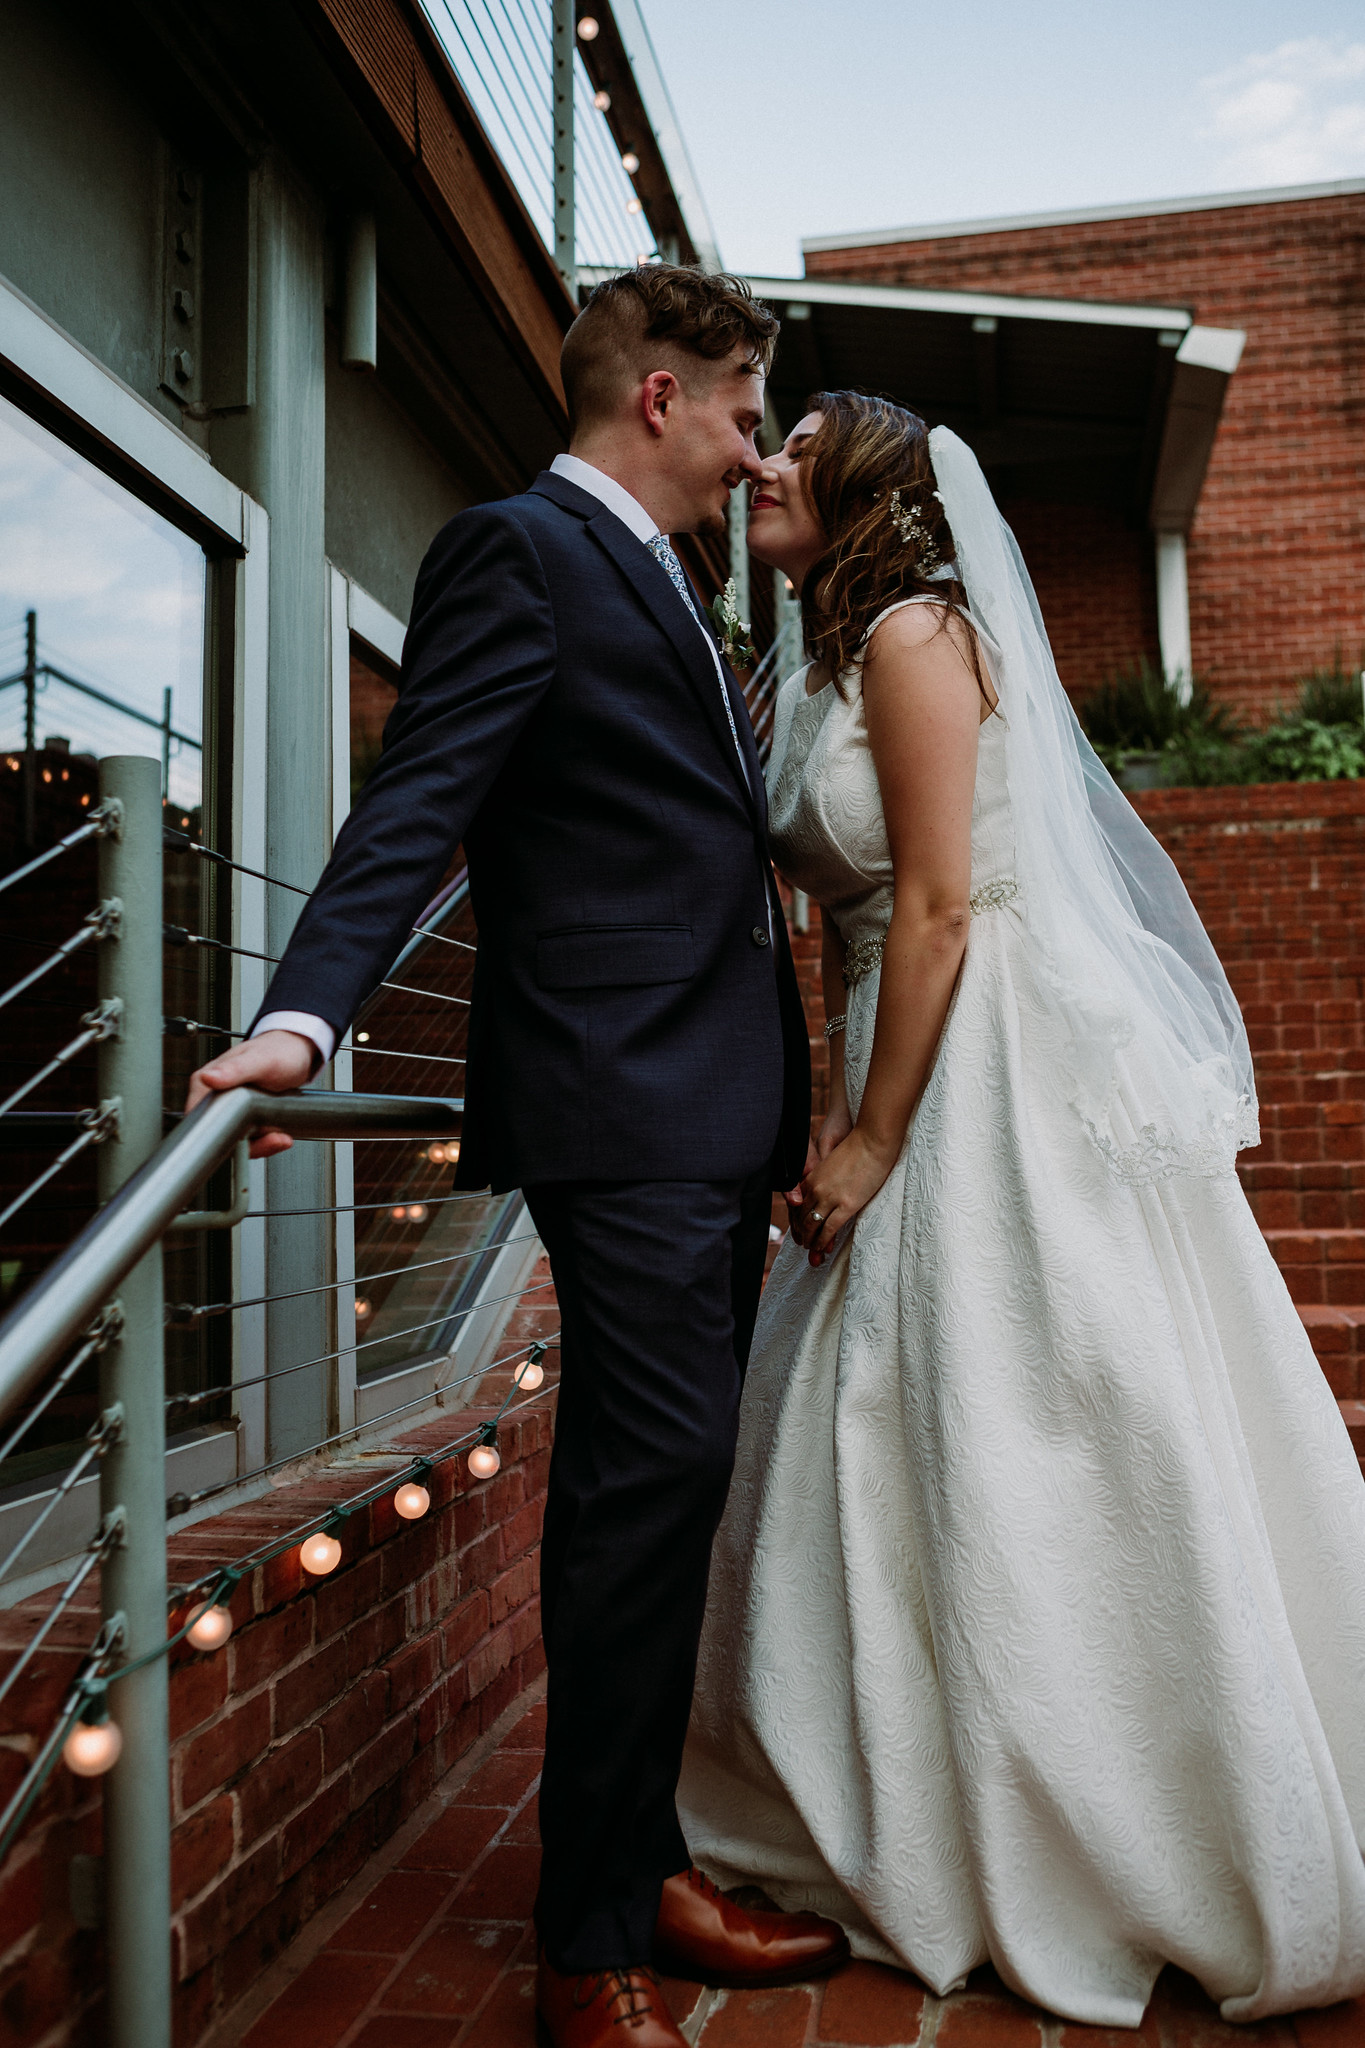 Bride and groom couples portraits. Wedding at The Grove at Discovery Green Park (Houston, TX)